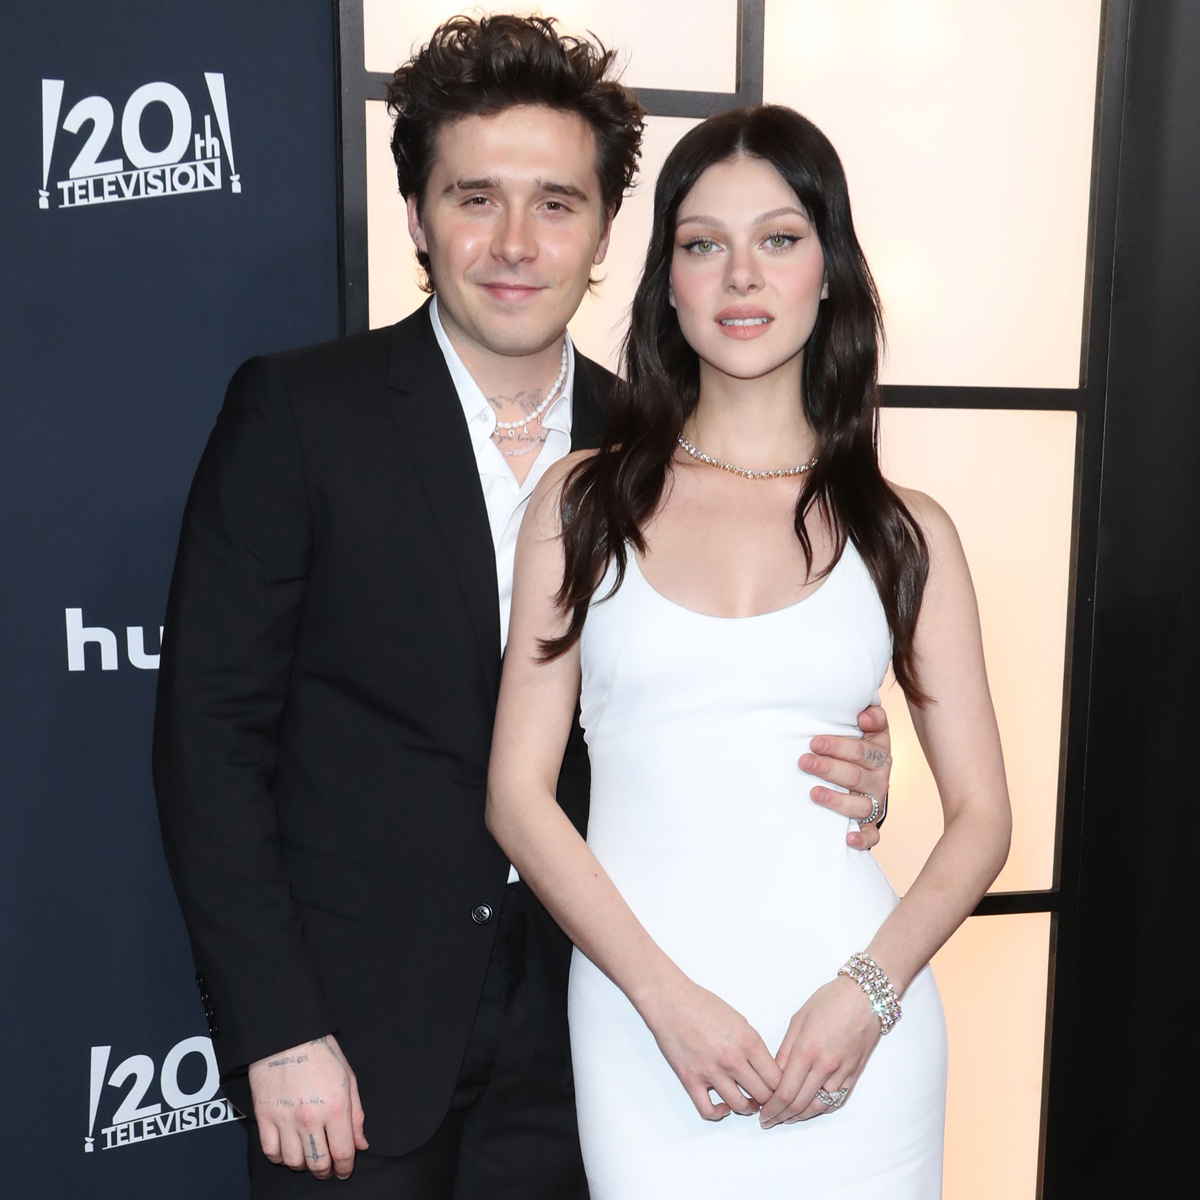 Brooklyn Beckham News, Pictures, and Videos - E! Online